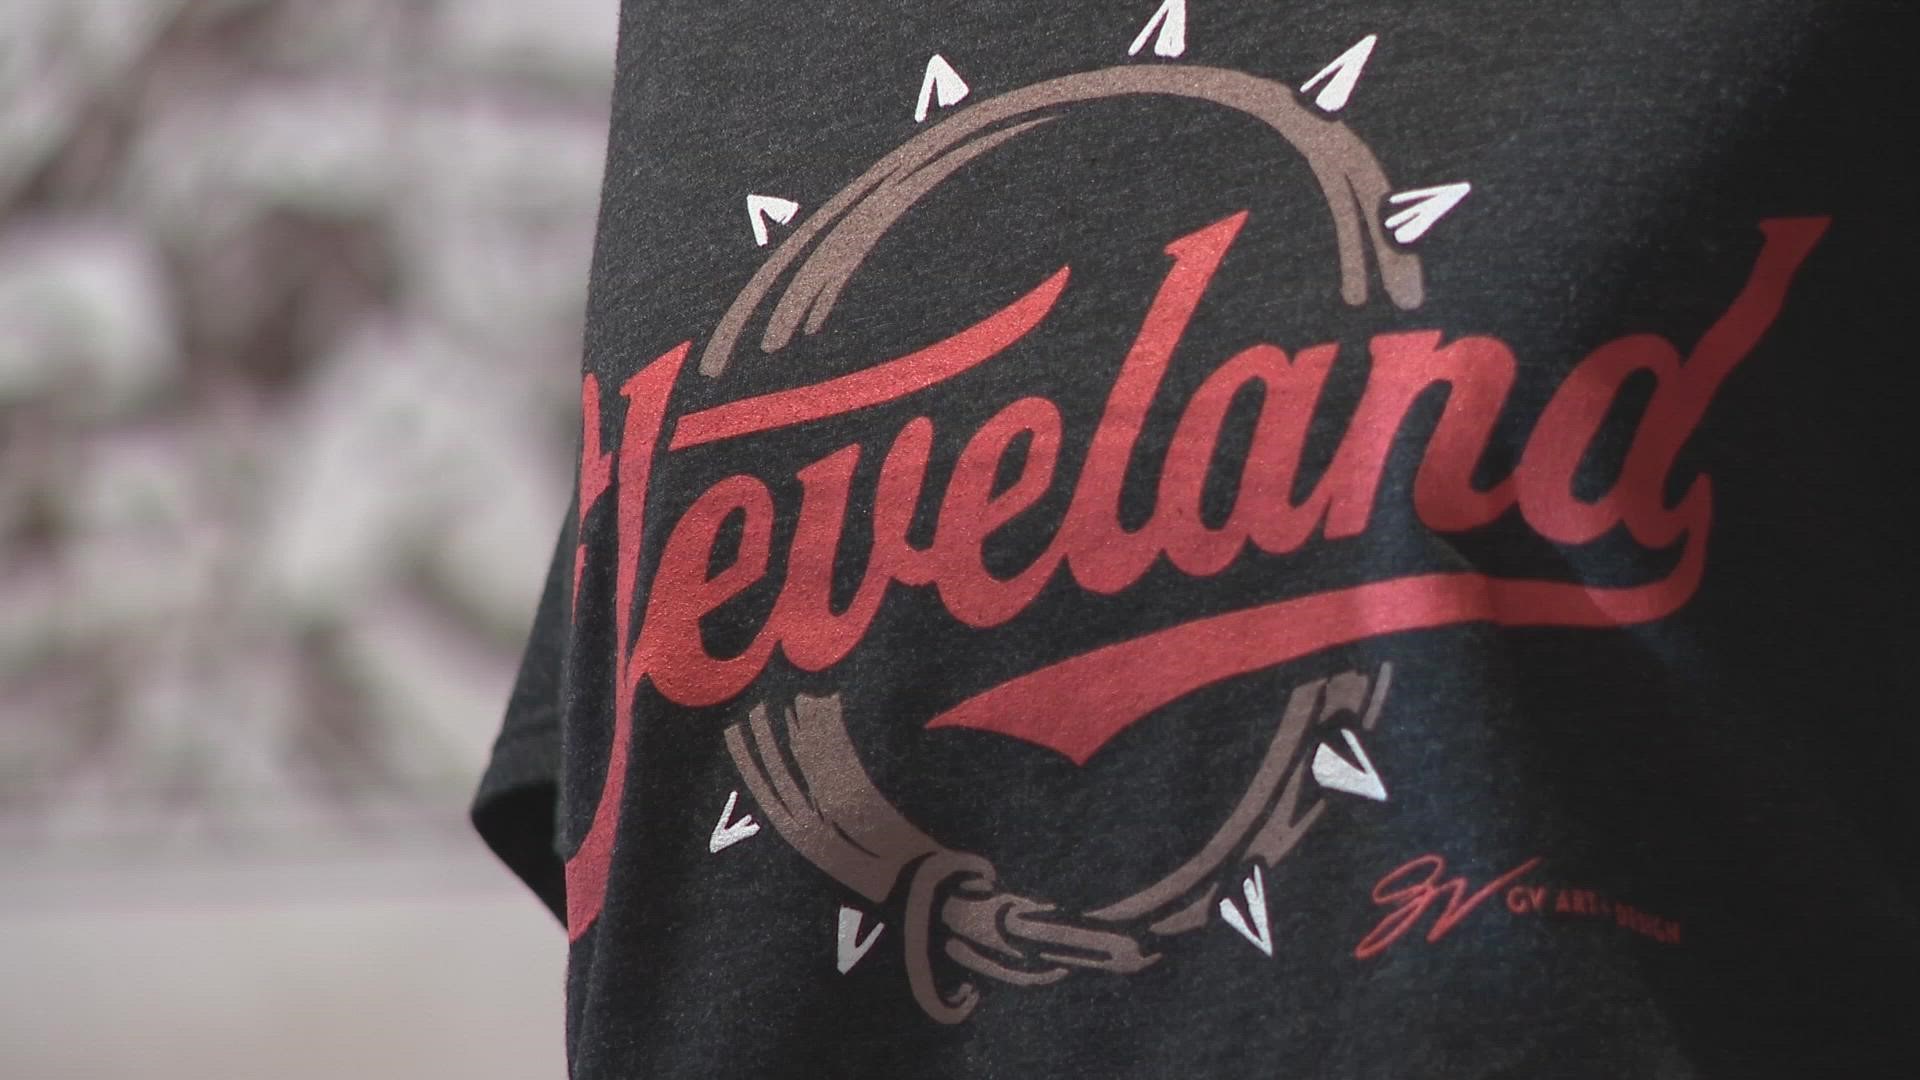 GV Art + Design teams up with Cleveland Clinic and University Hospitals for  T-shirt to support healthcare 'heroes